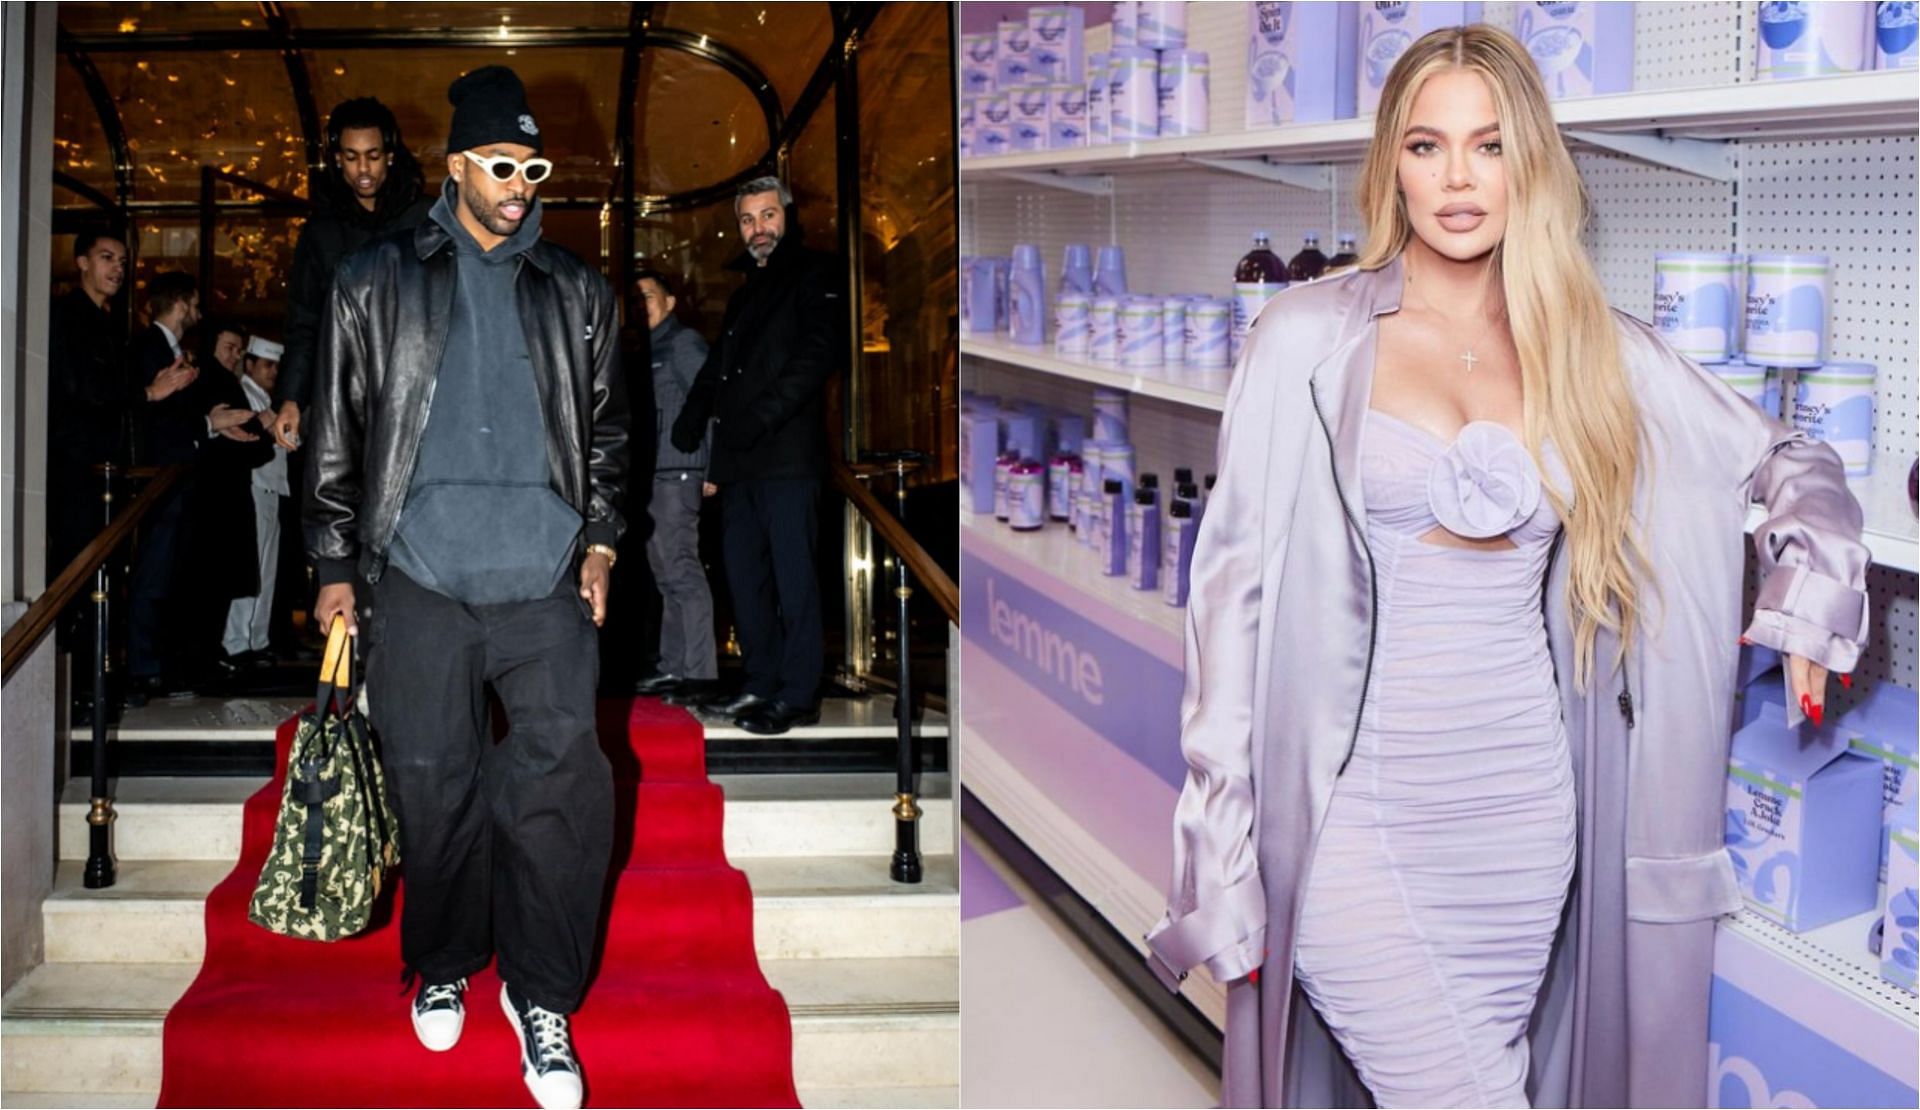 Khloe Kardashian seemingly uninterested in reuniting with Tristan Thompson despite his cheeky efforts